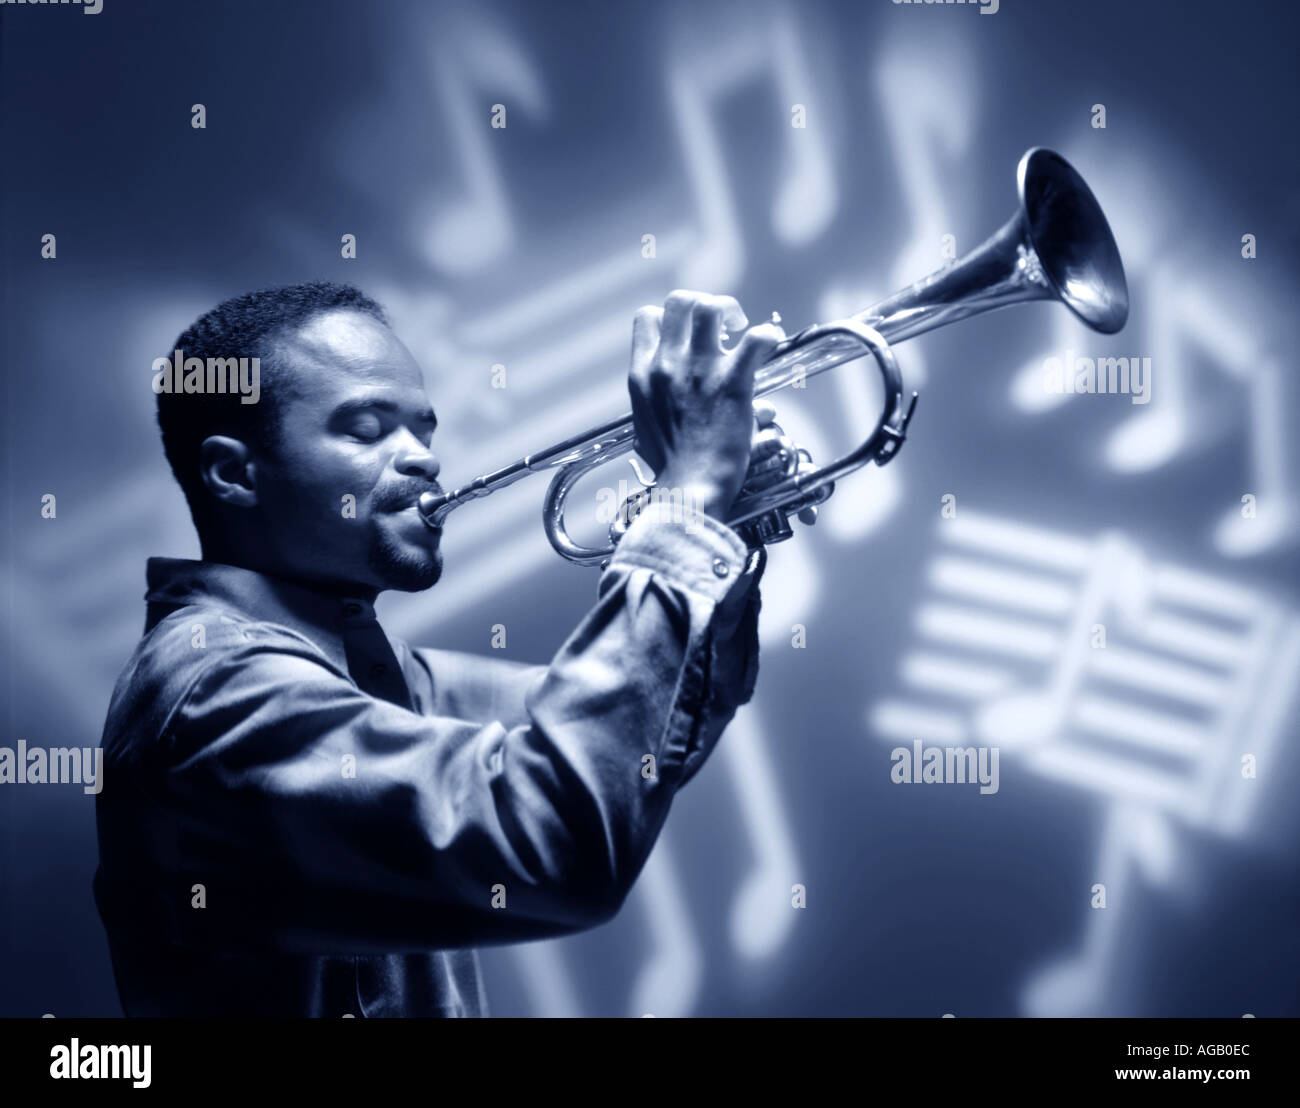 USA, Texas, Young woman playing trumpet stock photo